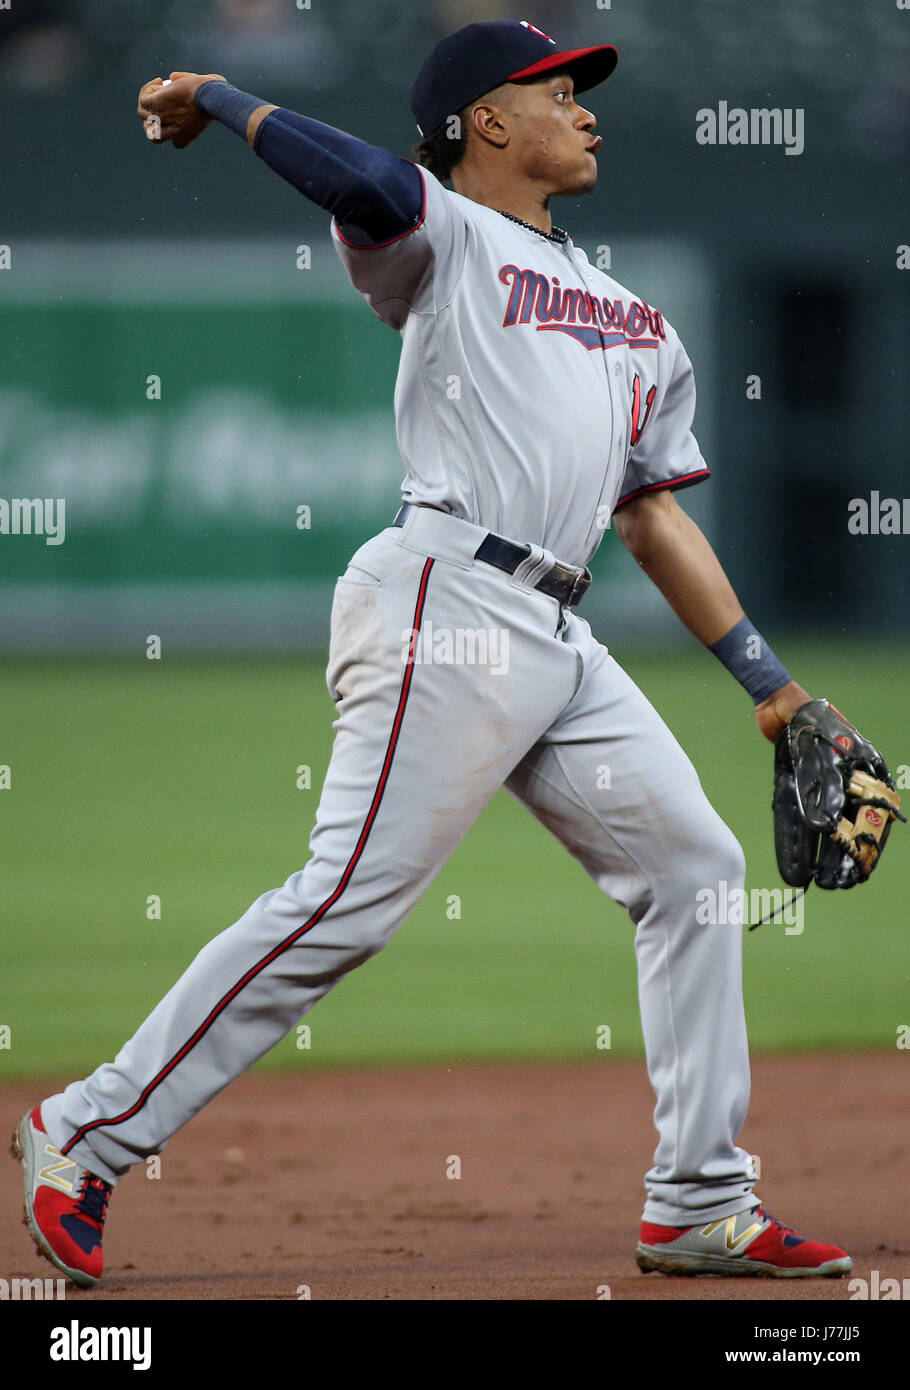 Baltimore, Maryland, USA. 23rd May, 2017. Minnesota Twins shortstop Jorge Polanco (11) in action during a match between the Baltimore Orioles and the Minnesota Twins at Camden Yards in Baltimore, Maryland. Daniel Kucin Jr./Cal Sport Media/Alamy Live News Stock Photo